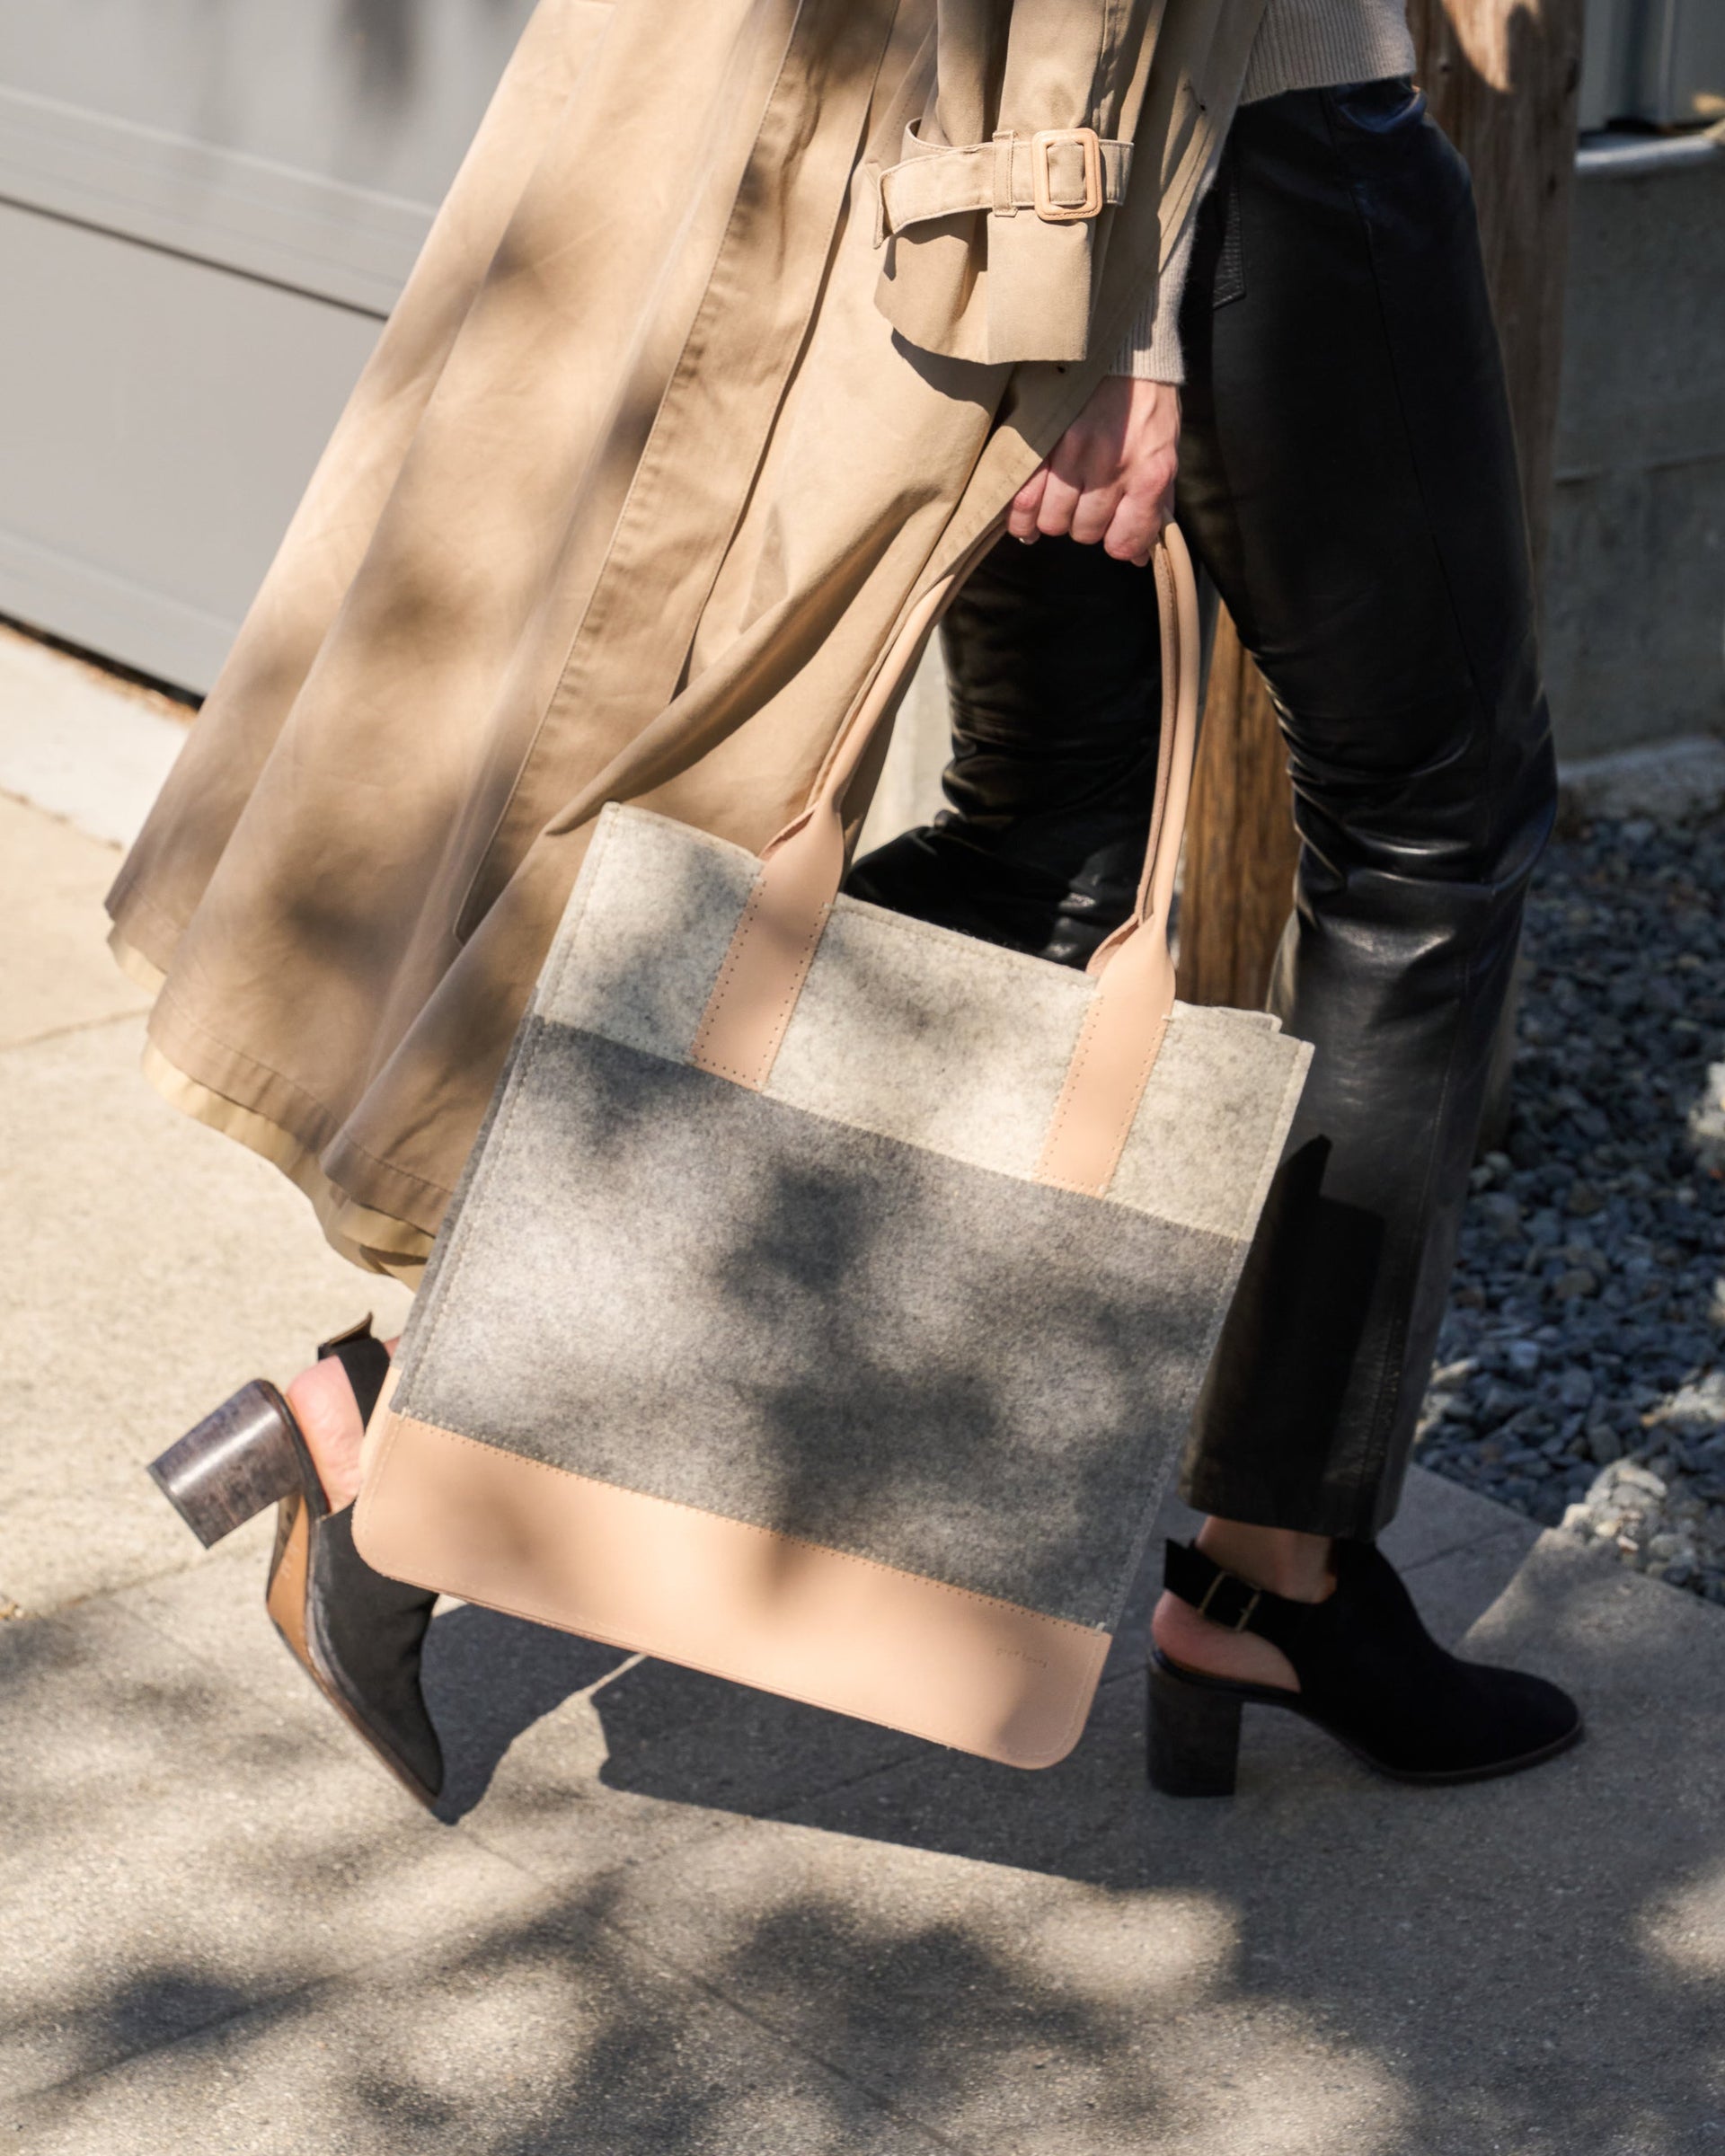 A granite-colored Jaunt Merino Wool Felt Tote bag is elegantly held by its top handle as a woman walks, showcasing its chic design